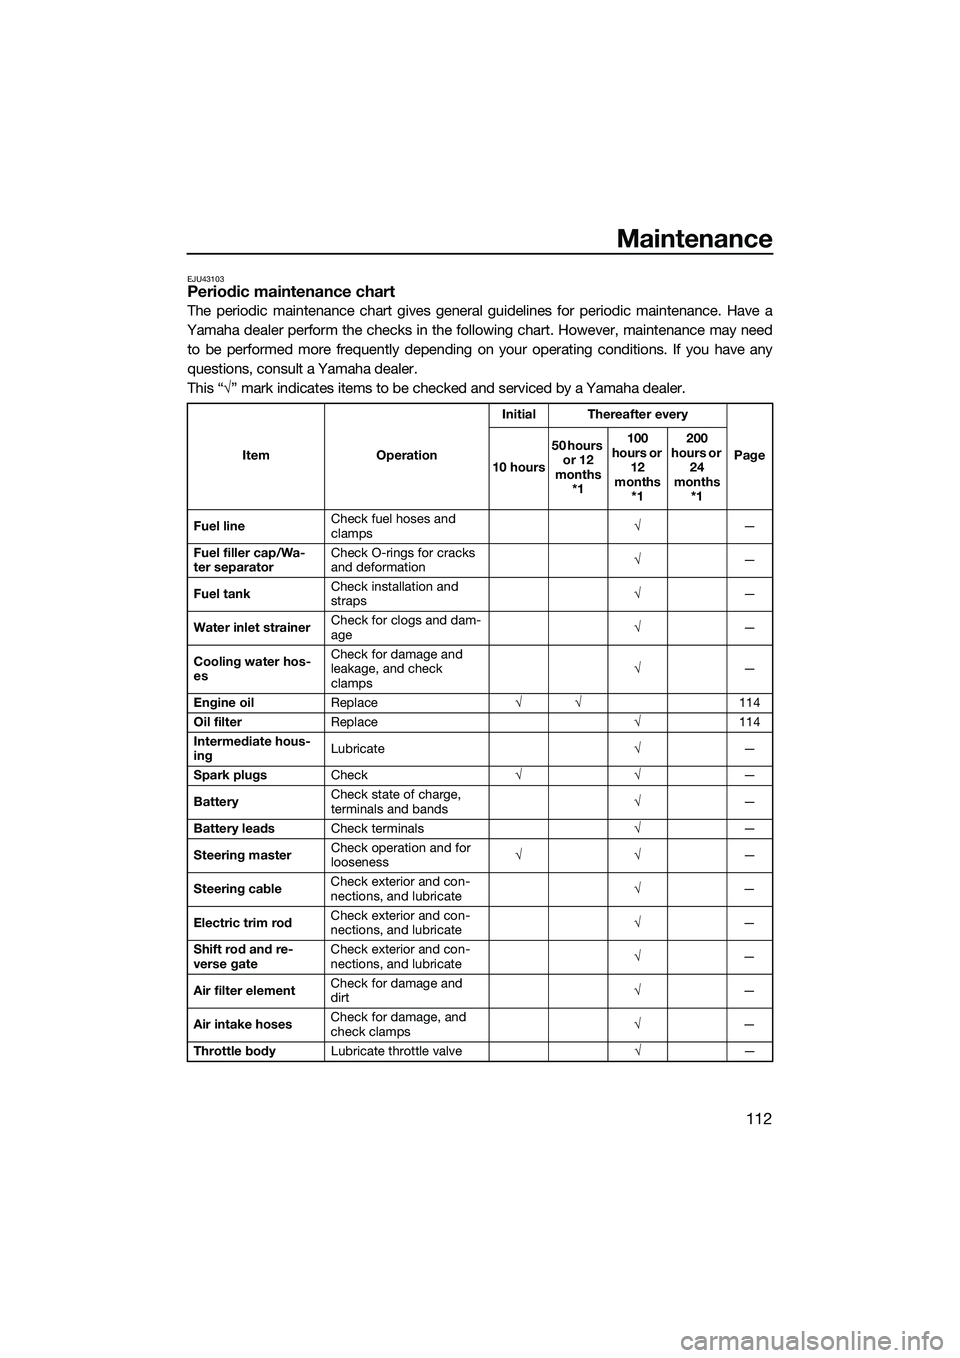 YAMAHA FX HO CRUISER 2022  Owners Manual Maintenance
112
EJU43103Periodic maintenance chart
The periodic maintenance chart gives general guidelines for periodic maintenance. Have a
Yamaha dealer perform the checks in the following chart. How